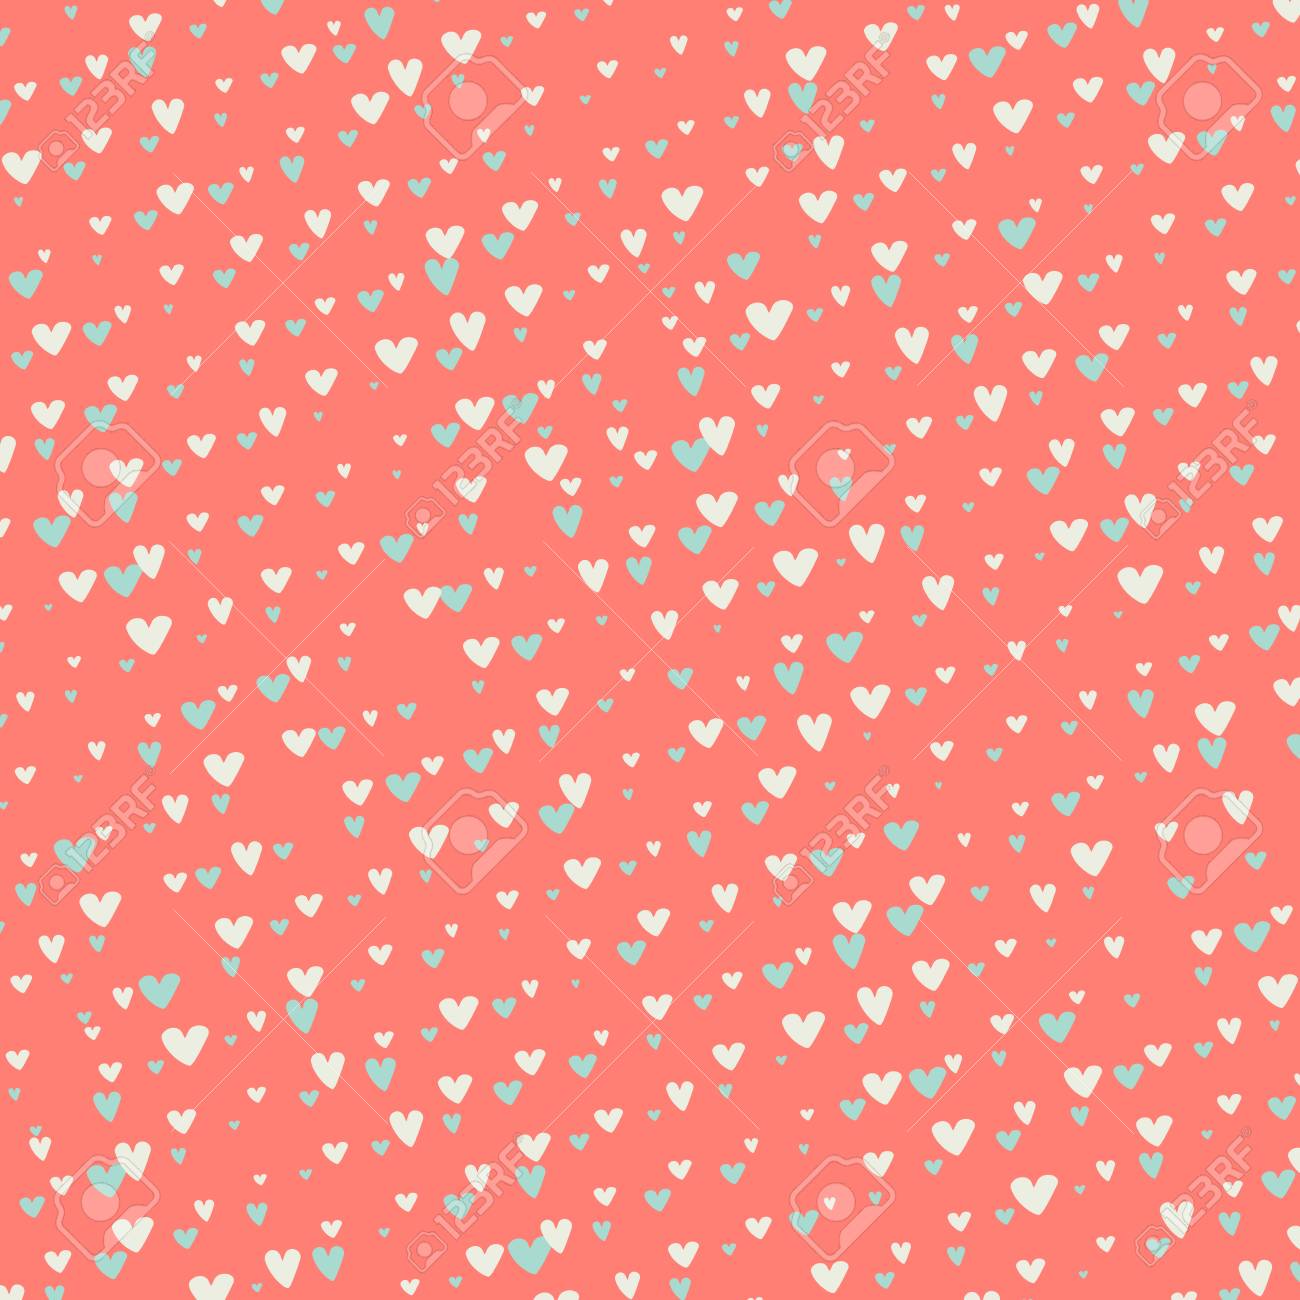 Cute Romantic Pattern With Doodle Hearts Scrapbooking Background